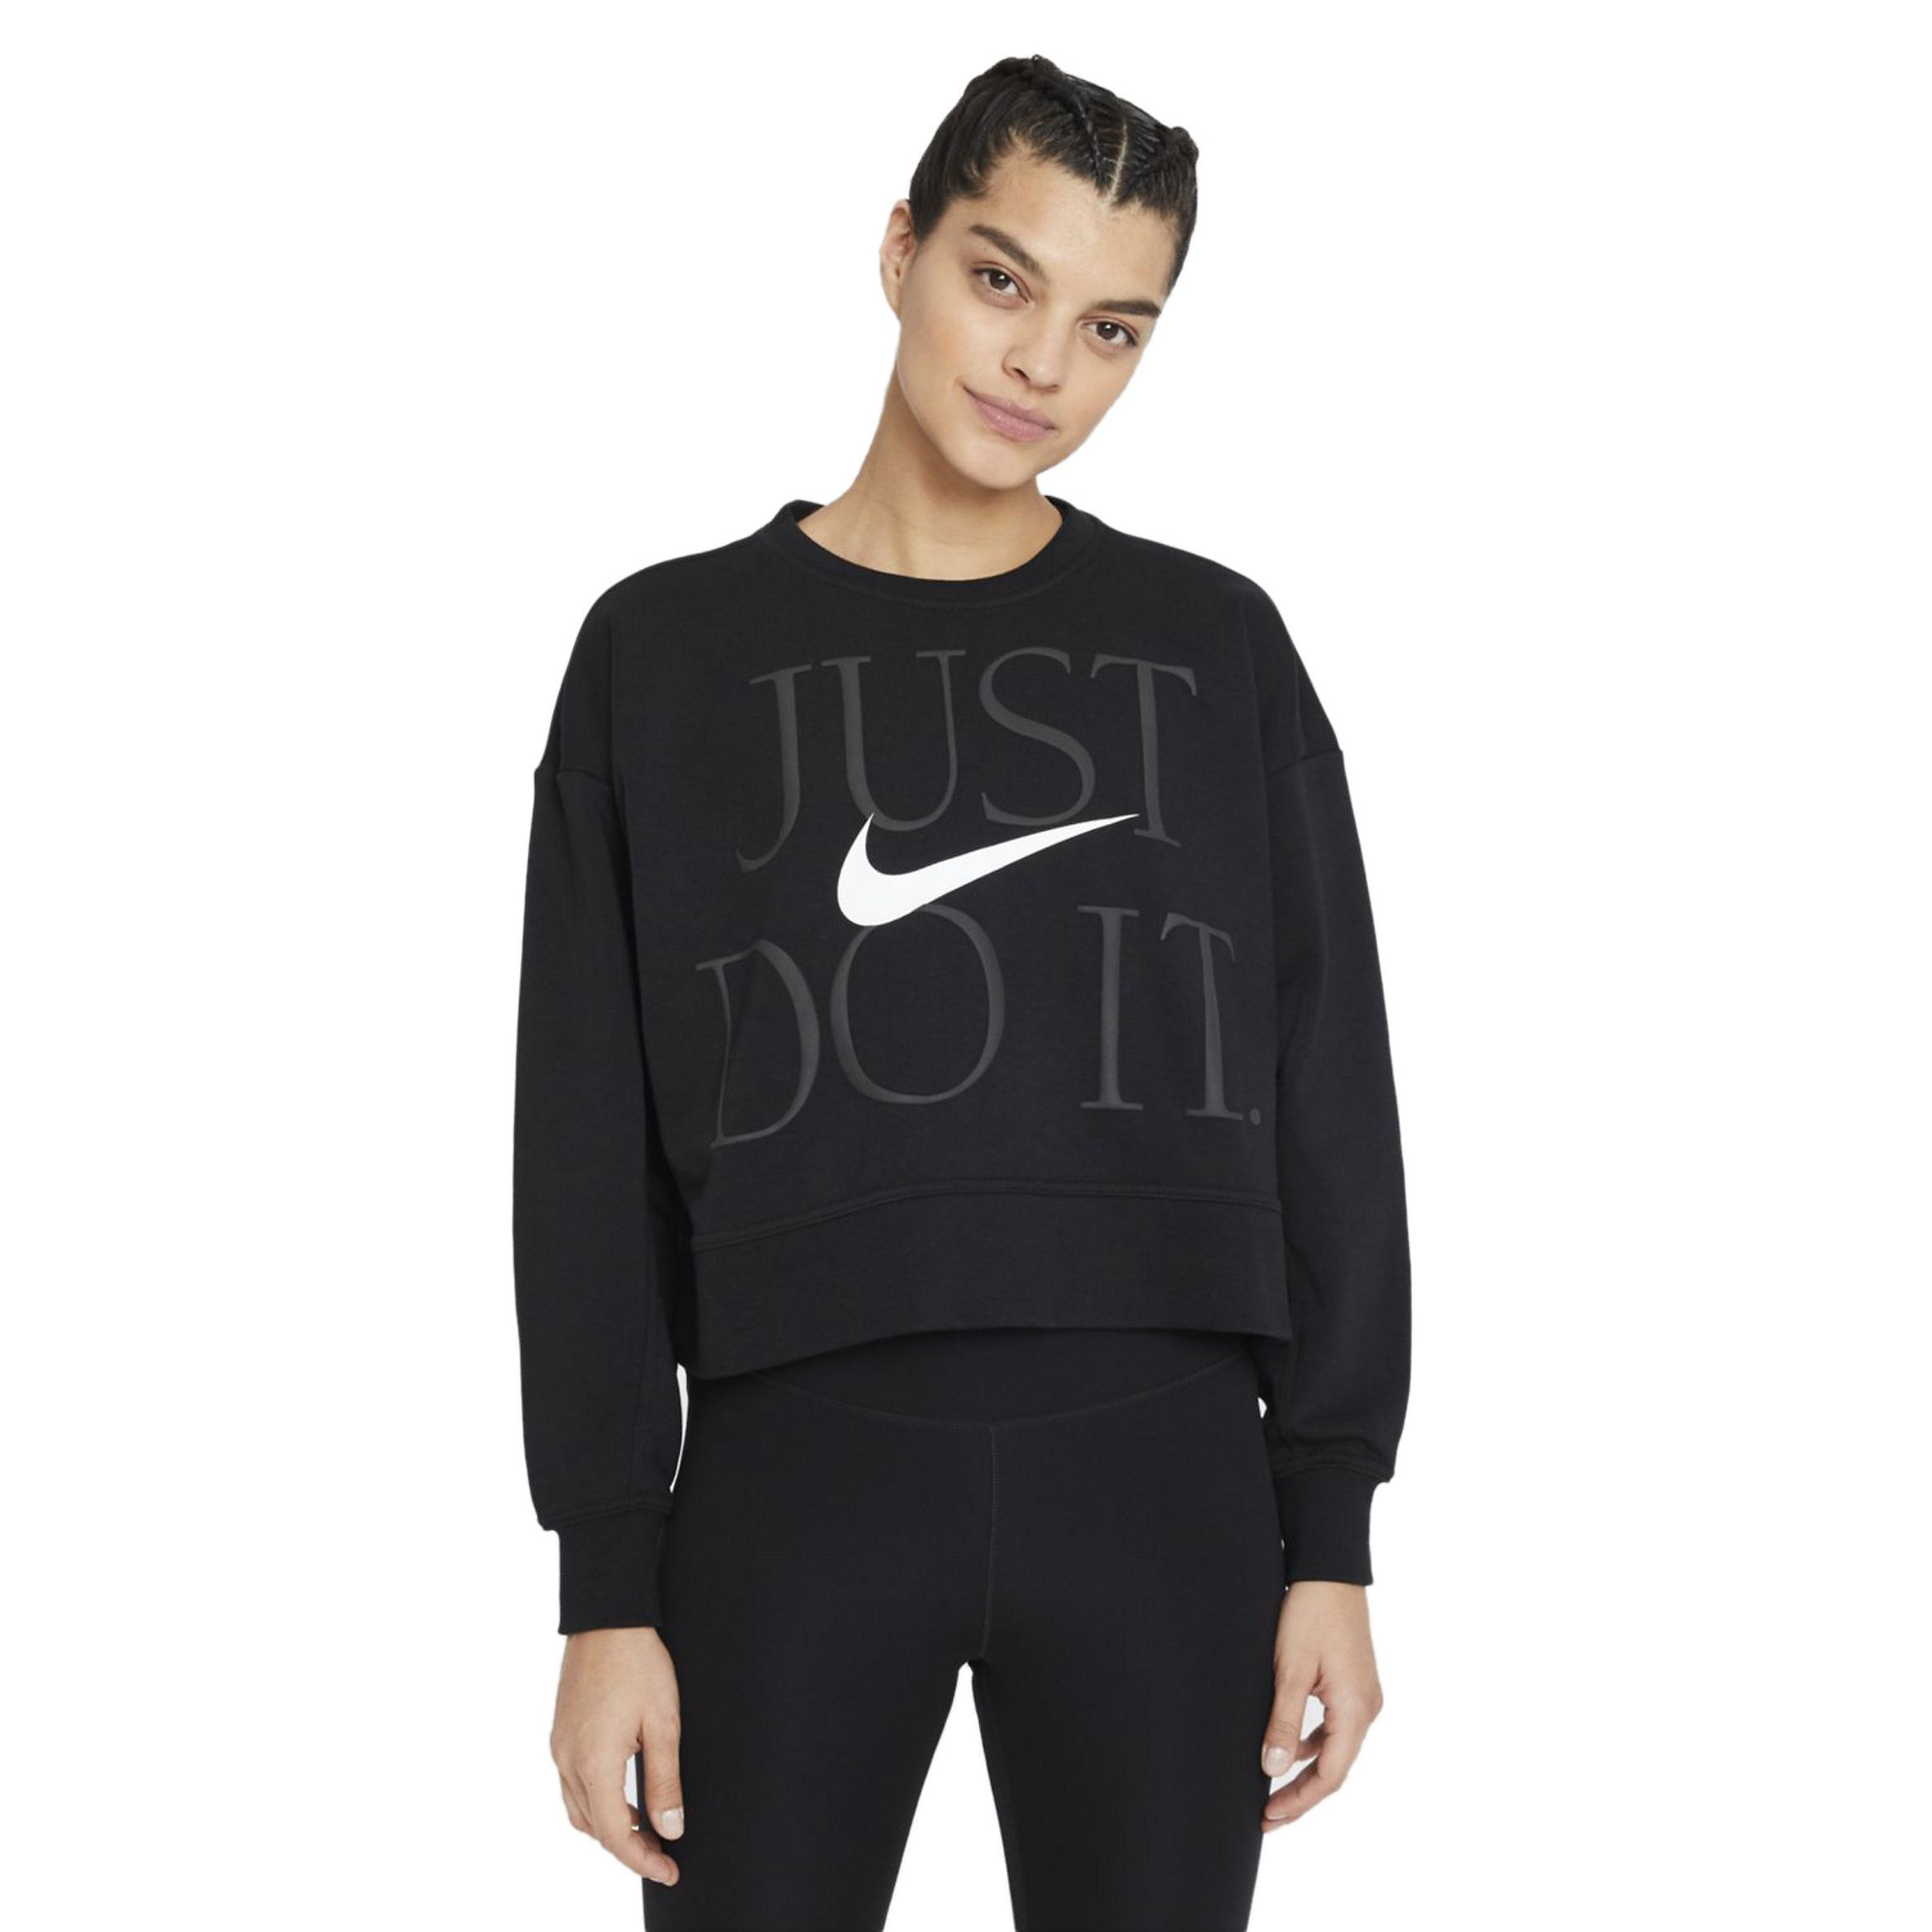 Women's Nike Dri-FIT Get Fit Training Pullover | Kohl's